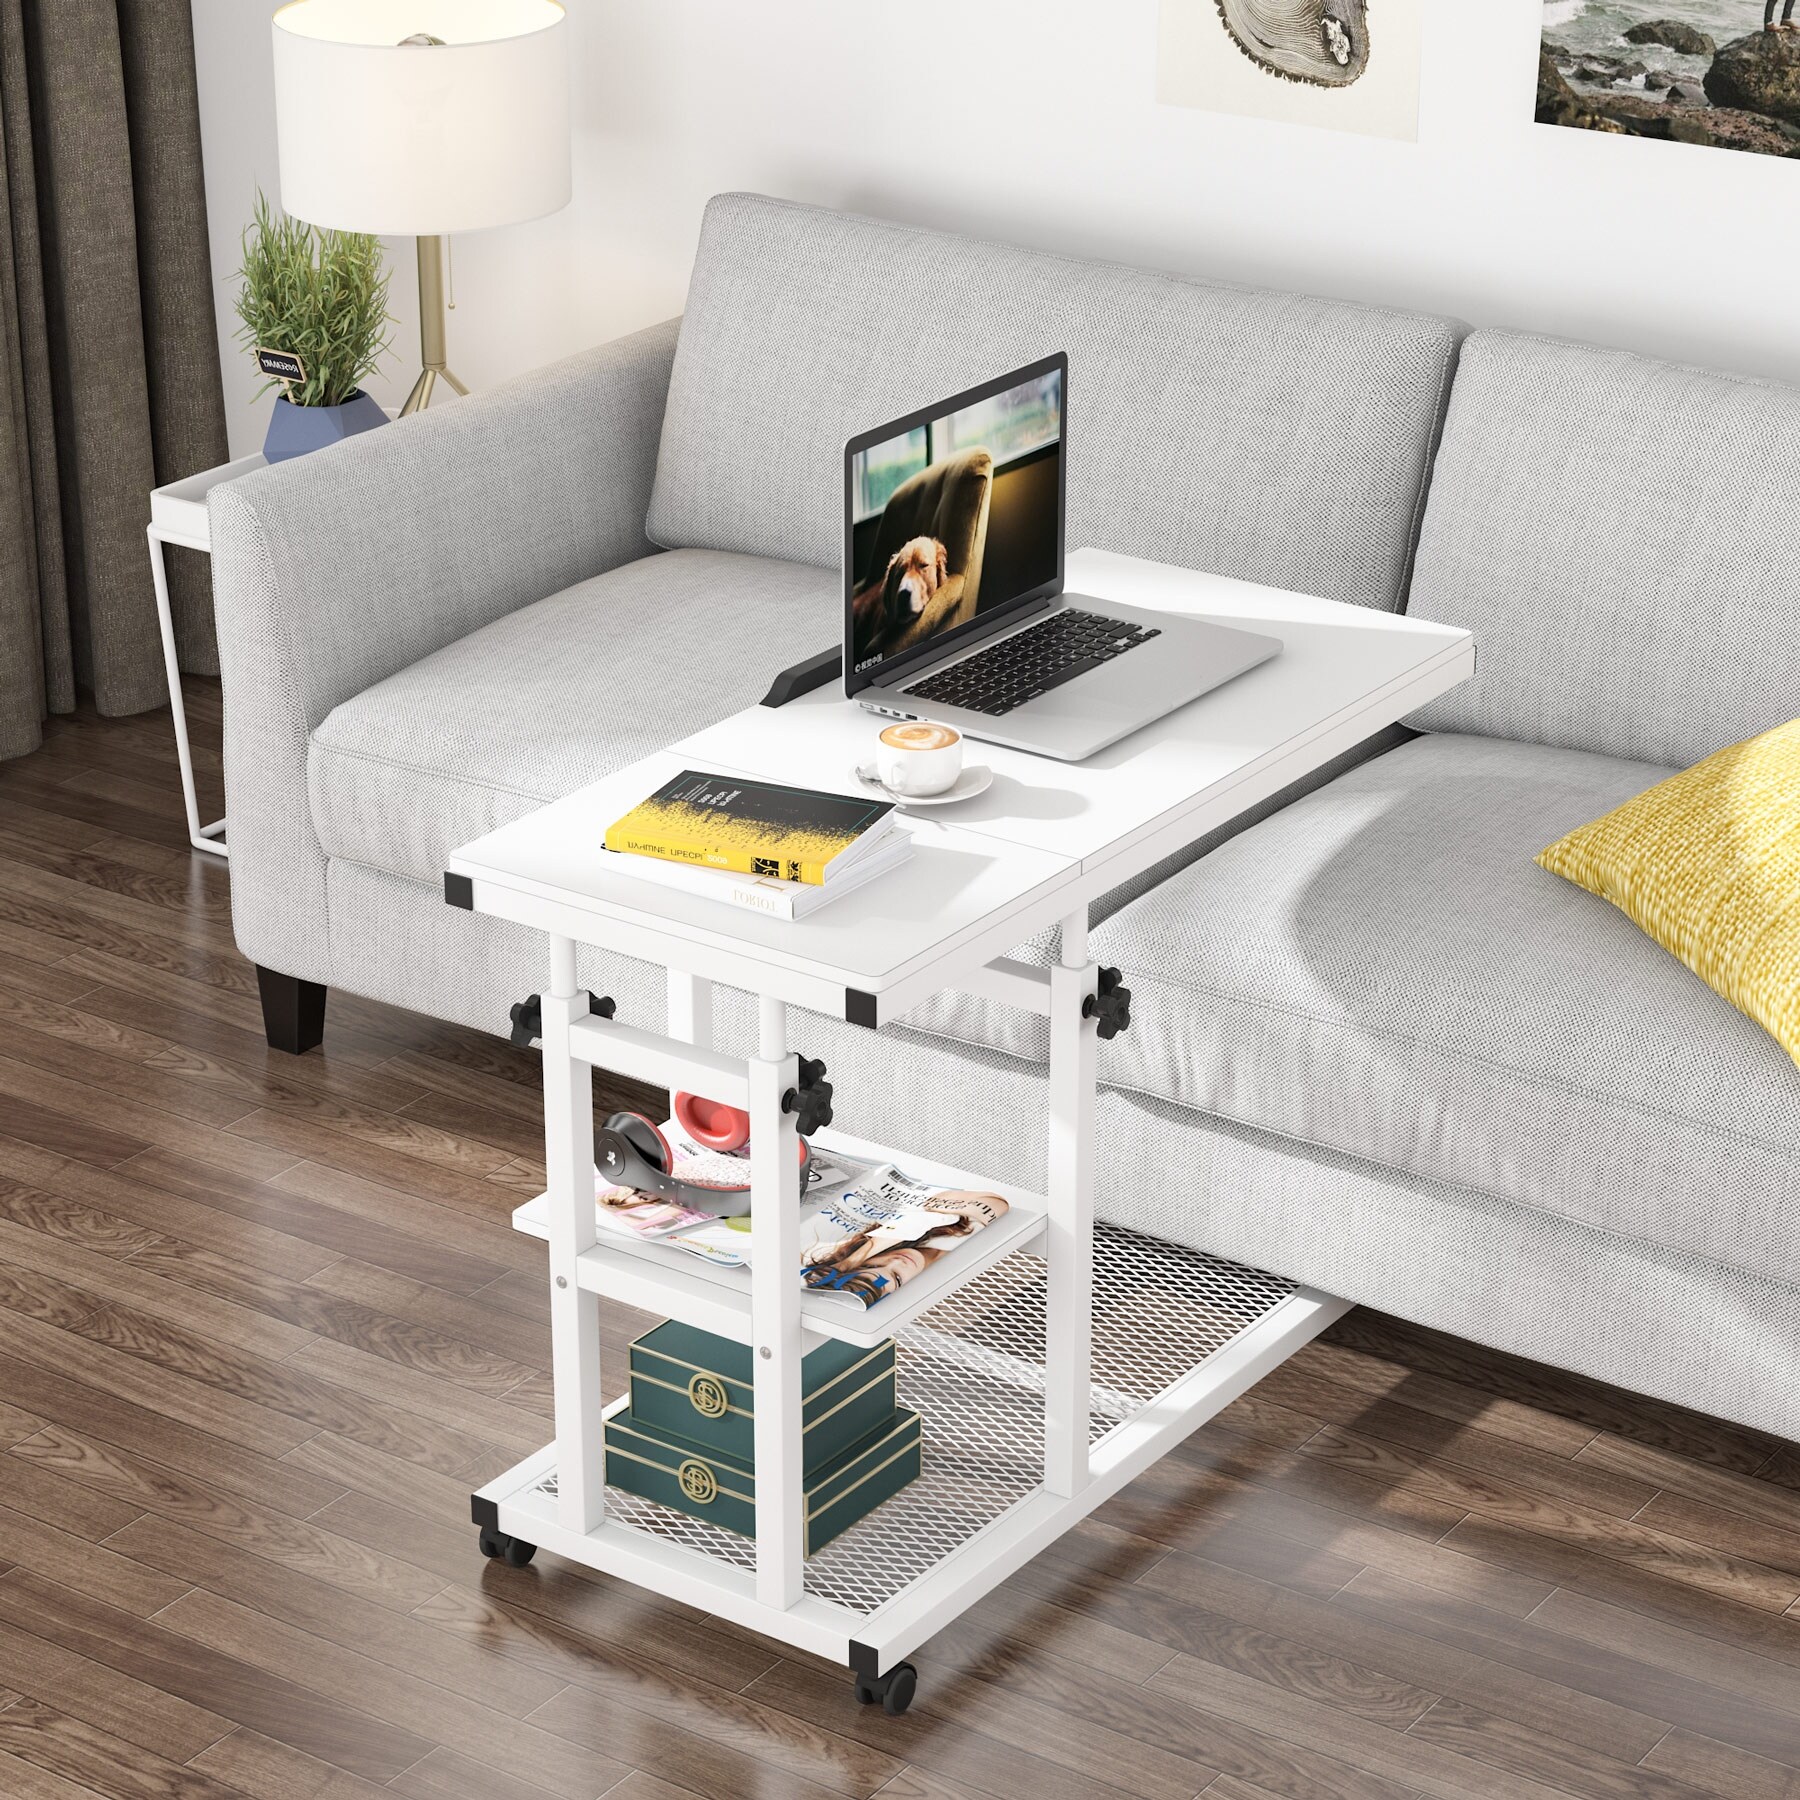 https://ak1.ostkcdn.com/images/products/is/images/direct/113030ea7e0be0f5c020a895c6967d3a969b2ba6/C-Table%2C-Height-Adjustable-Sofa-Side-Table%2C-Moblie-Snack-End-Table-with-Laptop-Stand.jpg